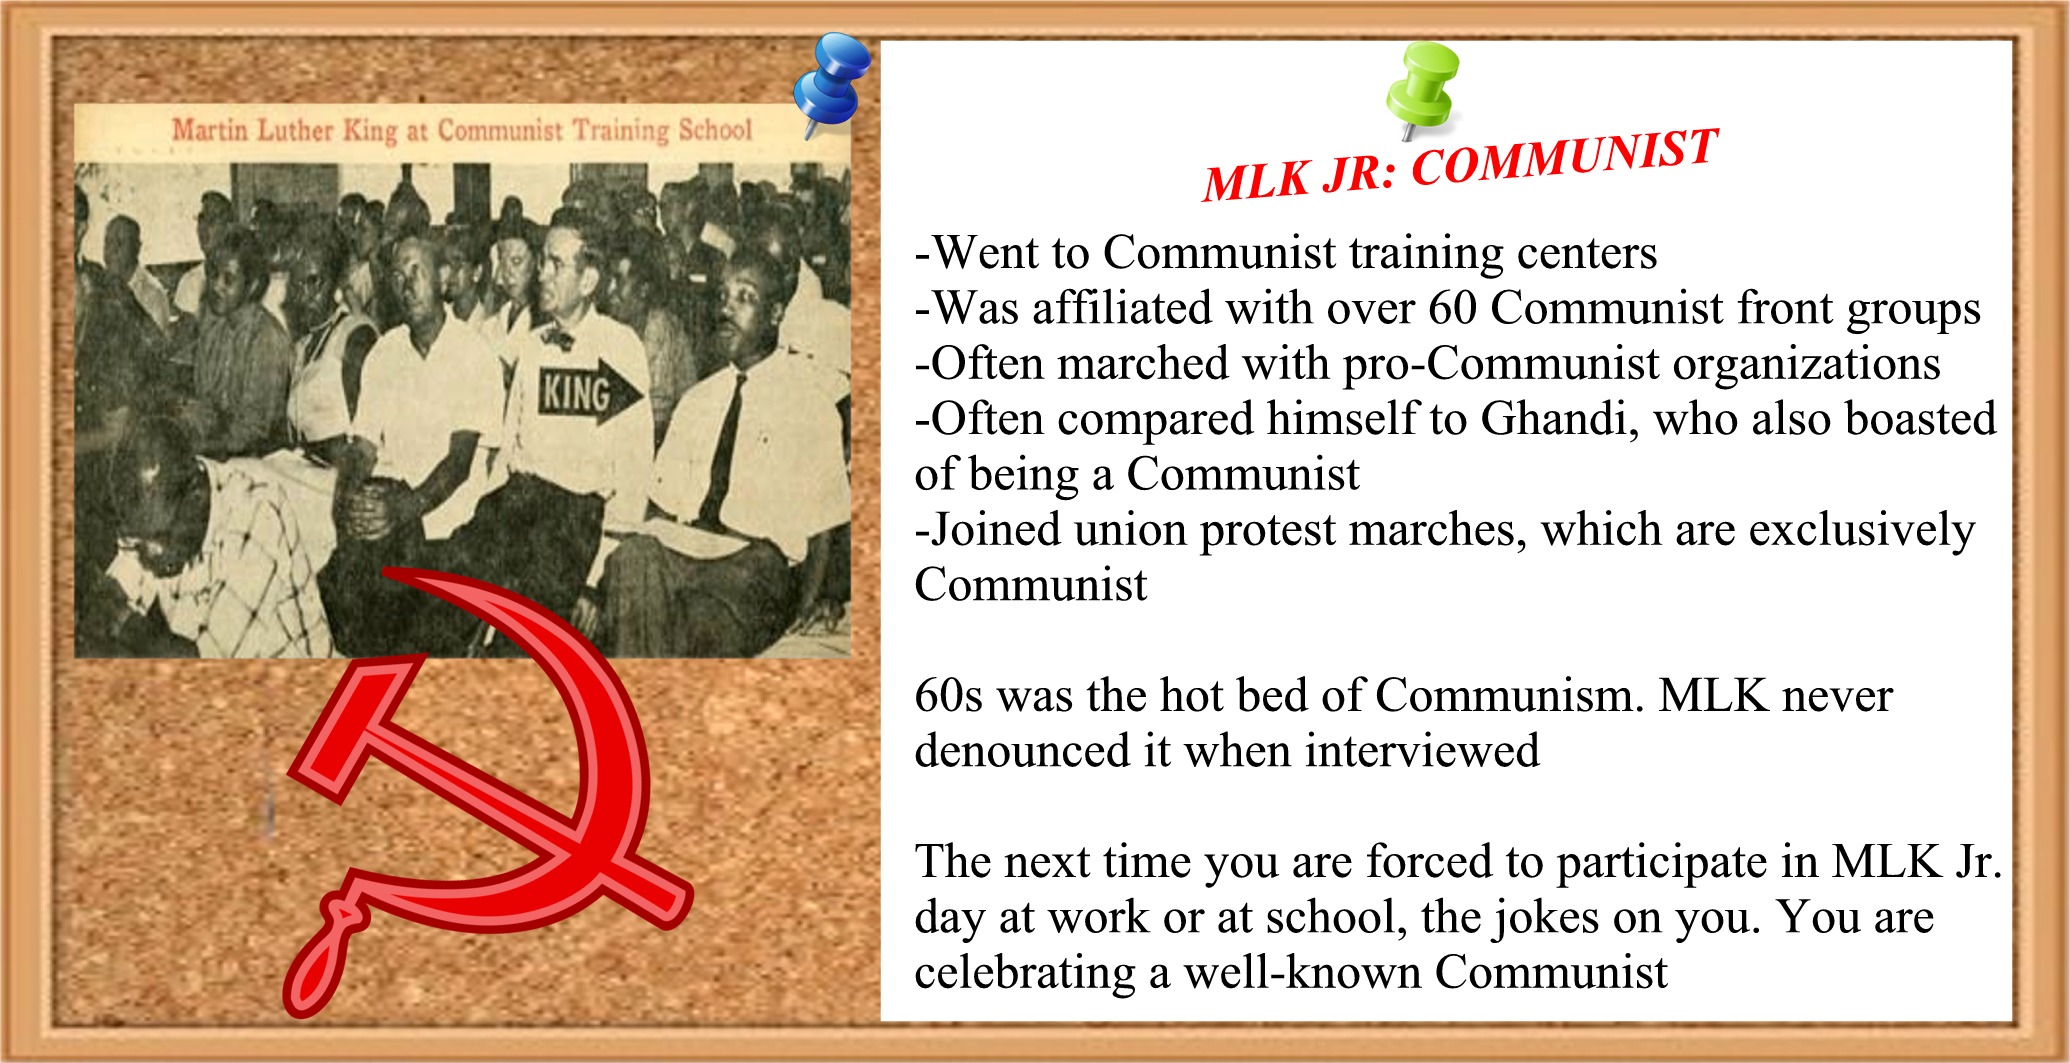 Eliminate Christianity from schools, promote and honor Communists.